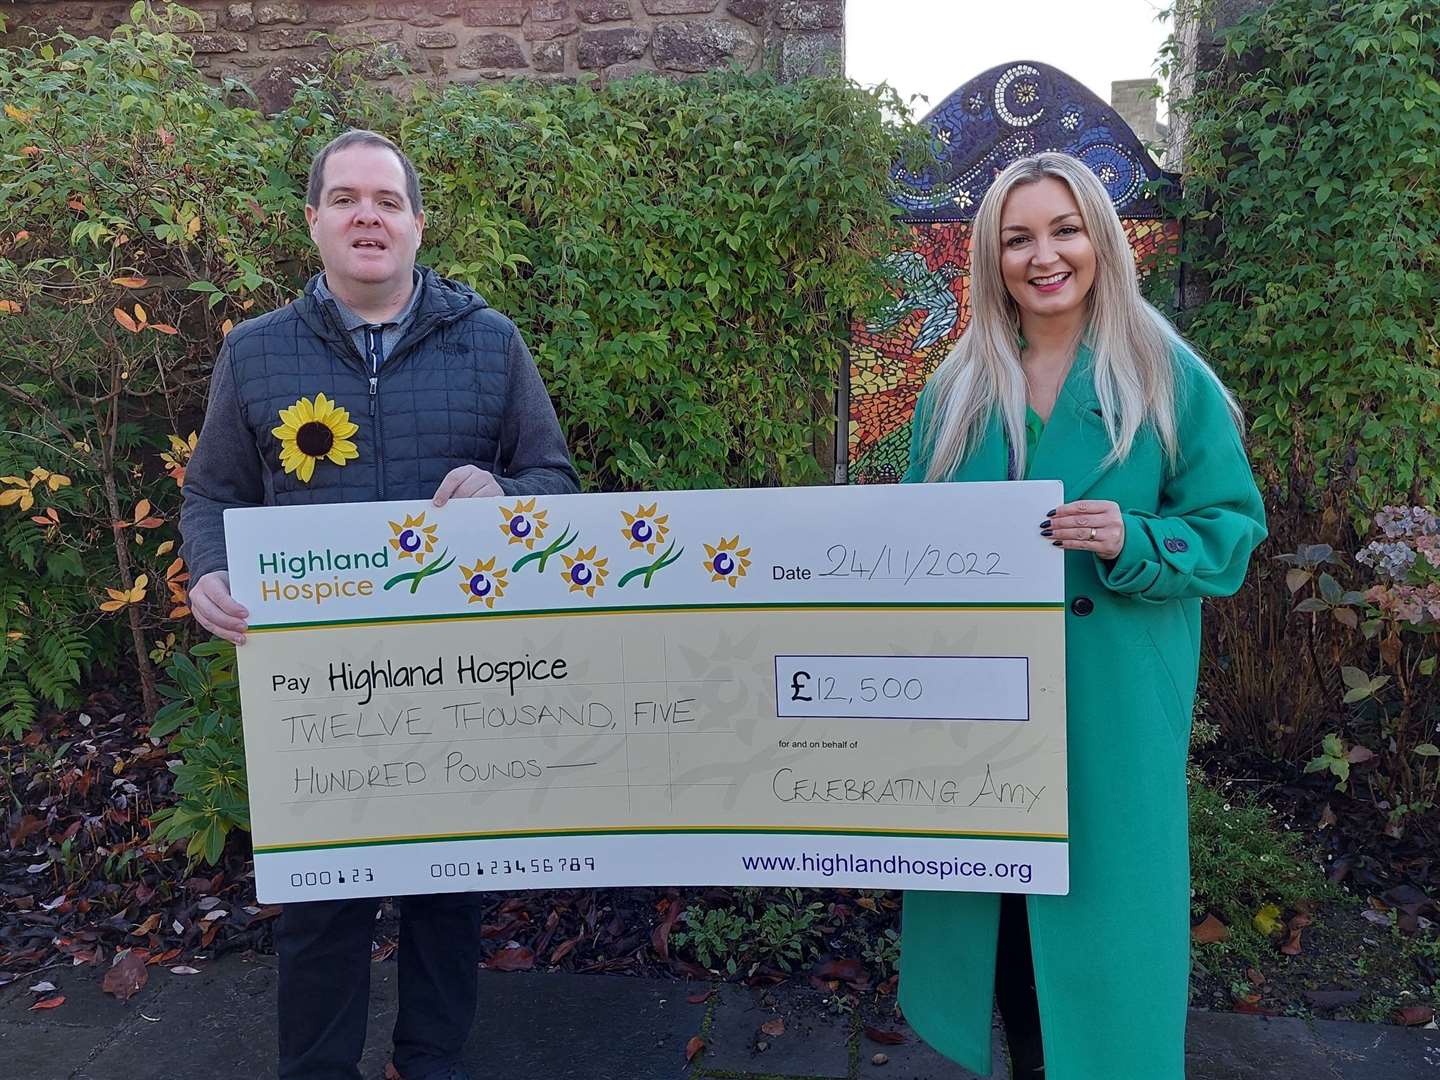 Gary Tuach hands over £12,500 to Highland Hospice. The same sum went to Mikeysline.